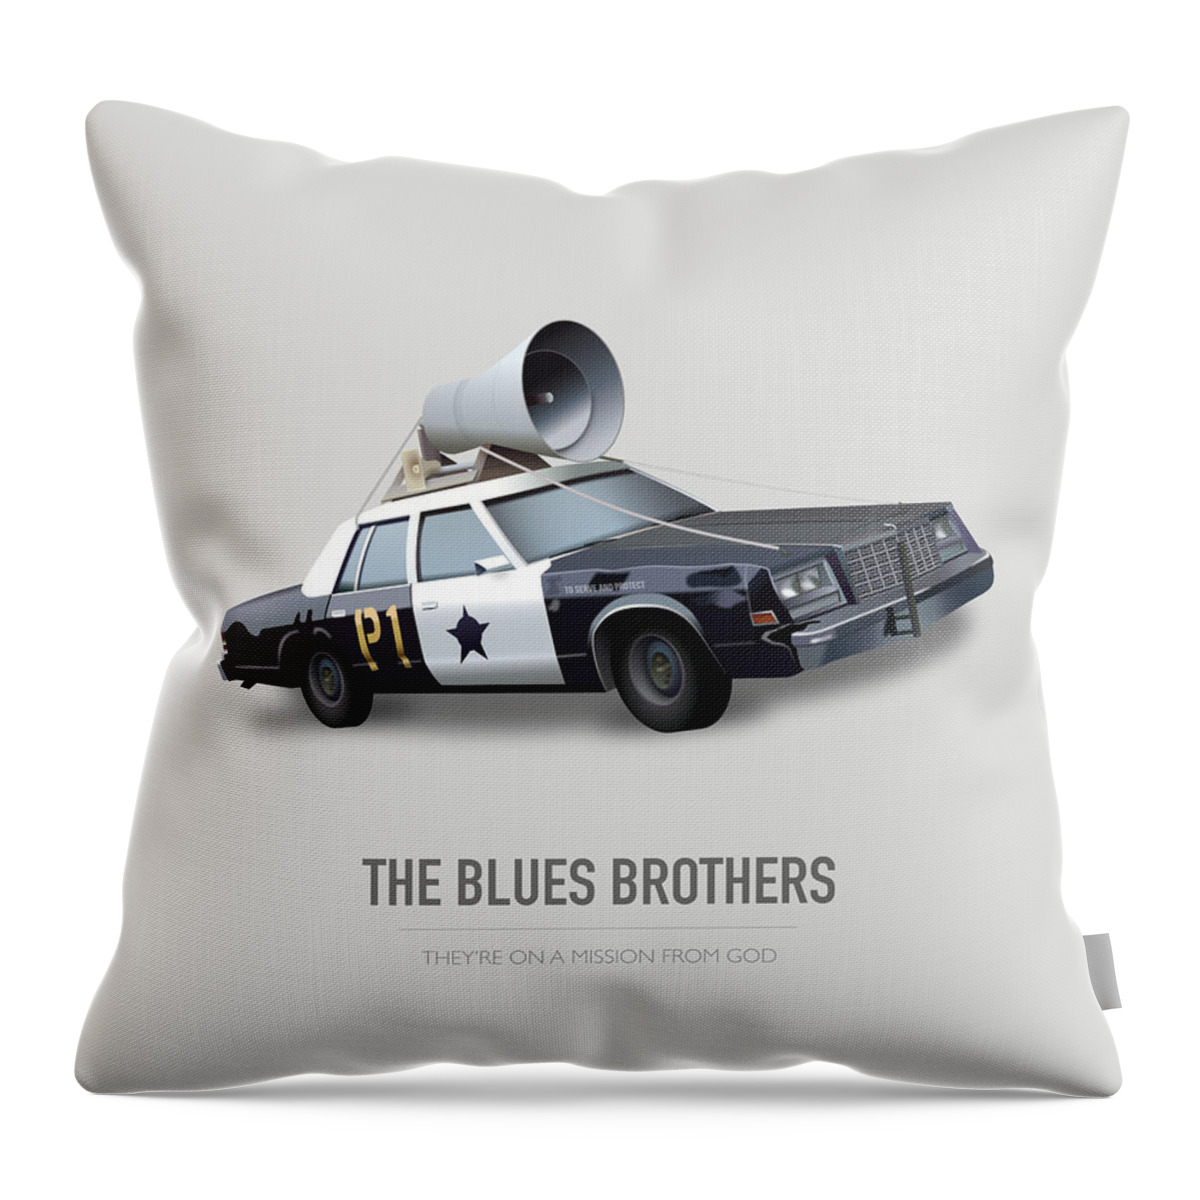 The Blues Brothers Throw Pillow featuring the digital art The Blues Brothers - Alternative Movie Poster by Movie Poster Boy